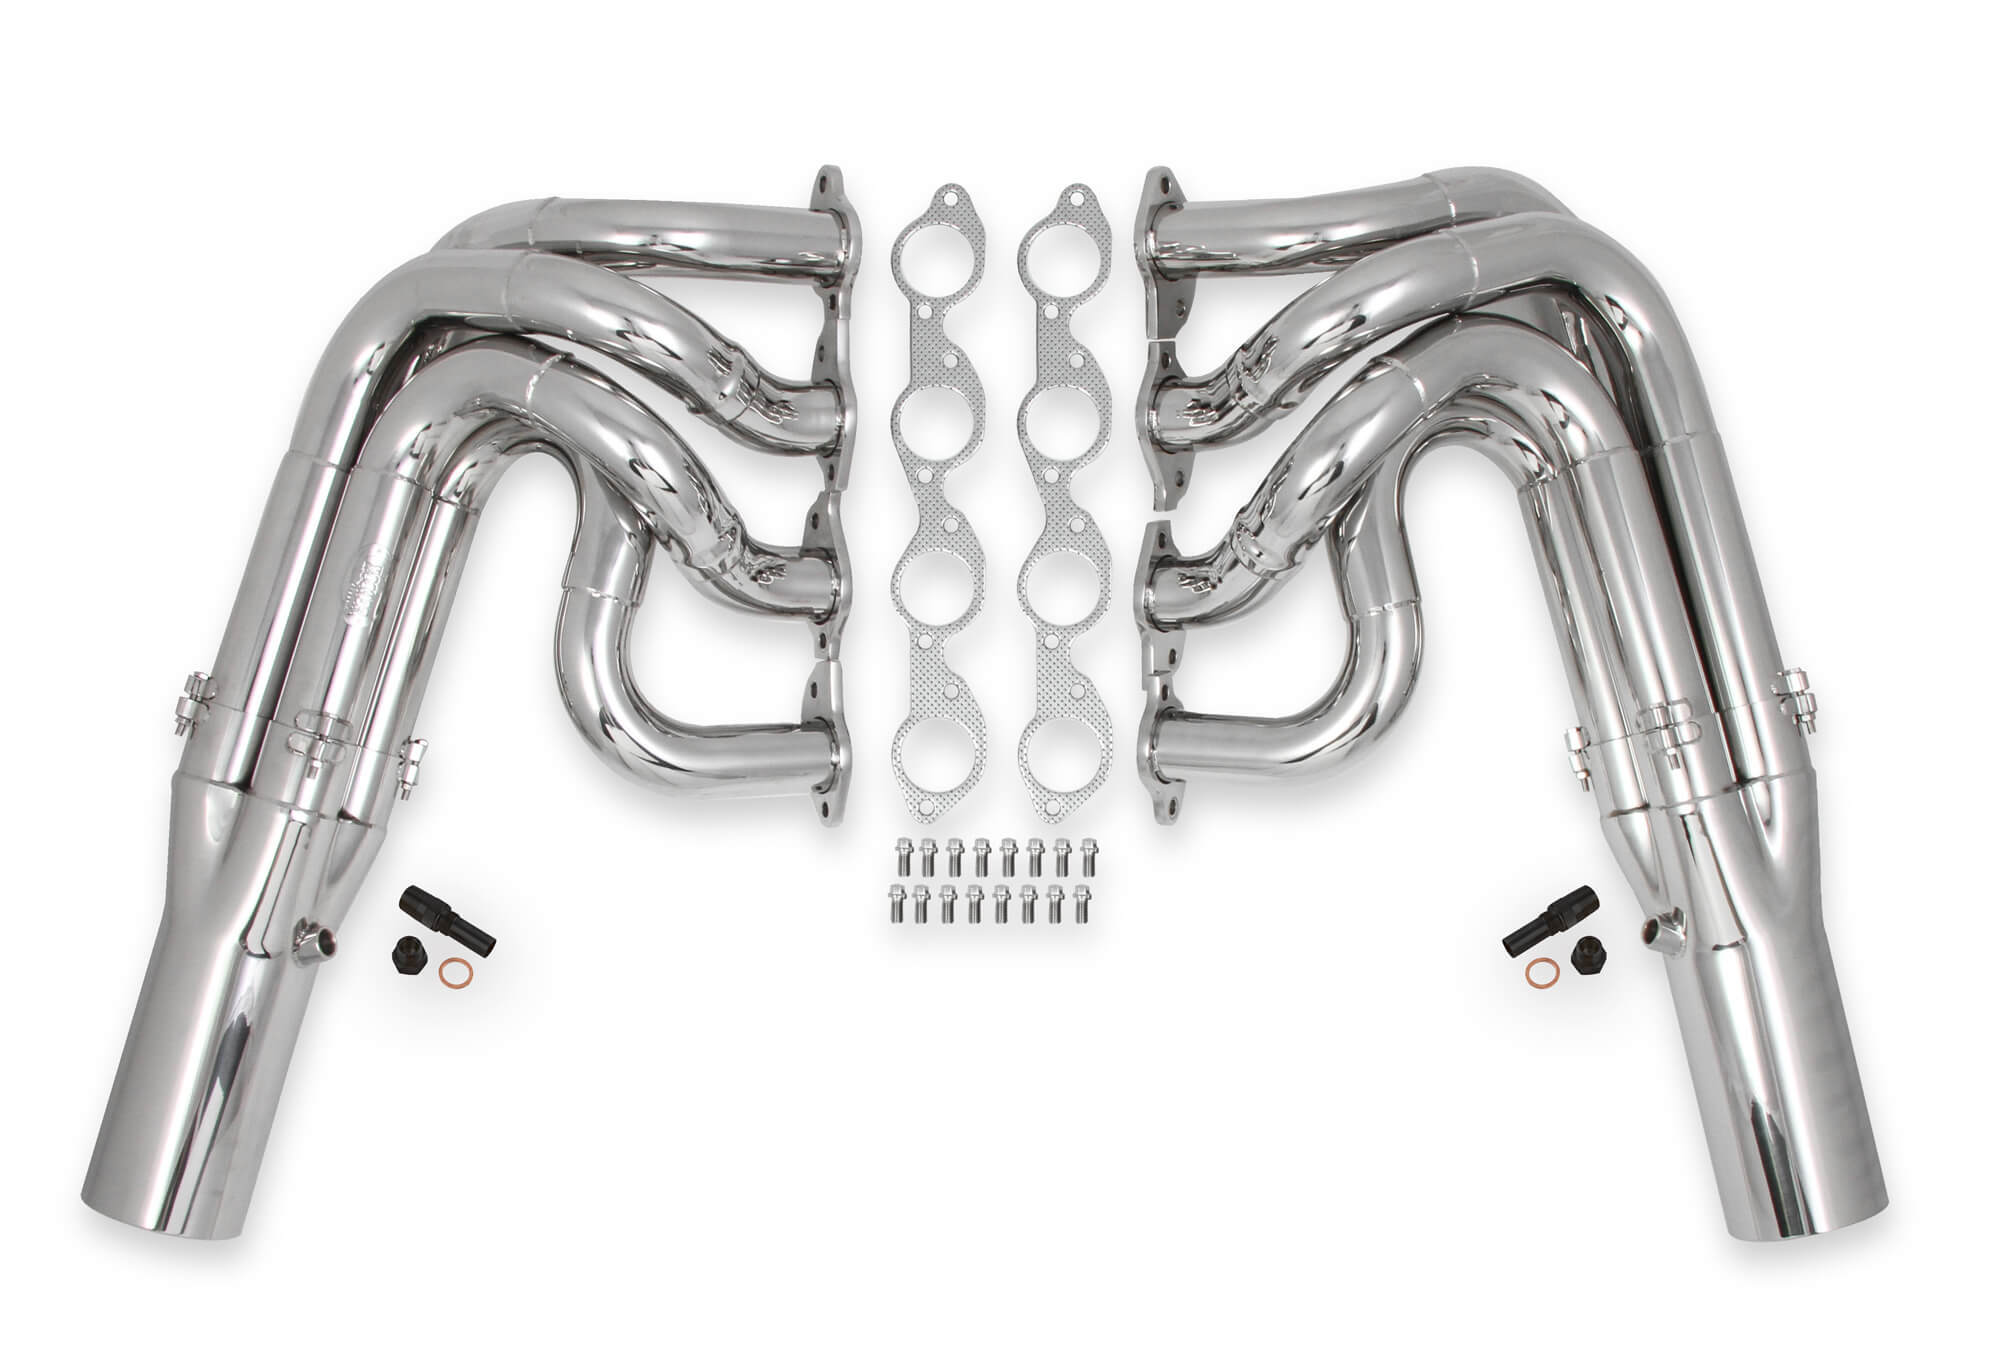 Hooker Headers 2501-2HKR - Headers, Racingheart, 2-1/8 to 2-3/8 in Primary, 4-1/2 in Collector, Stainless, Polished, Big Block Chevy, Kit